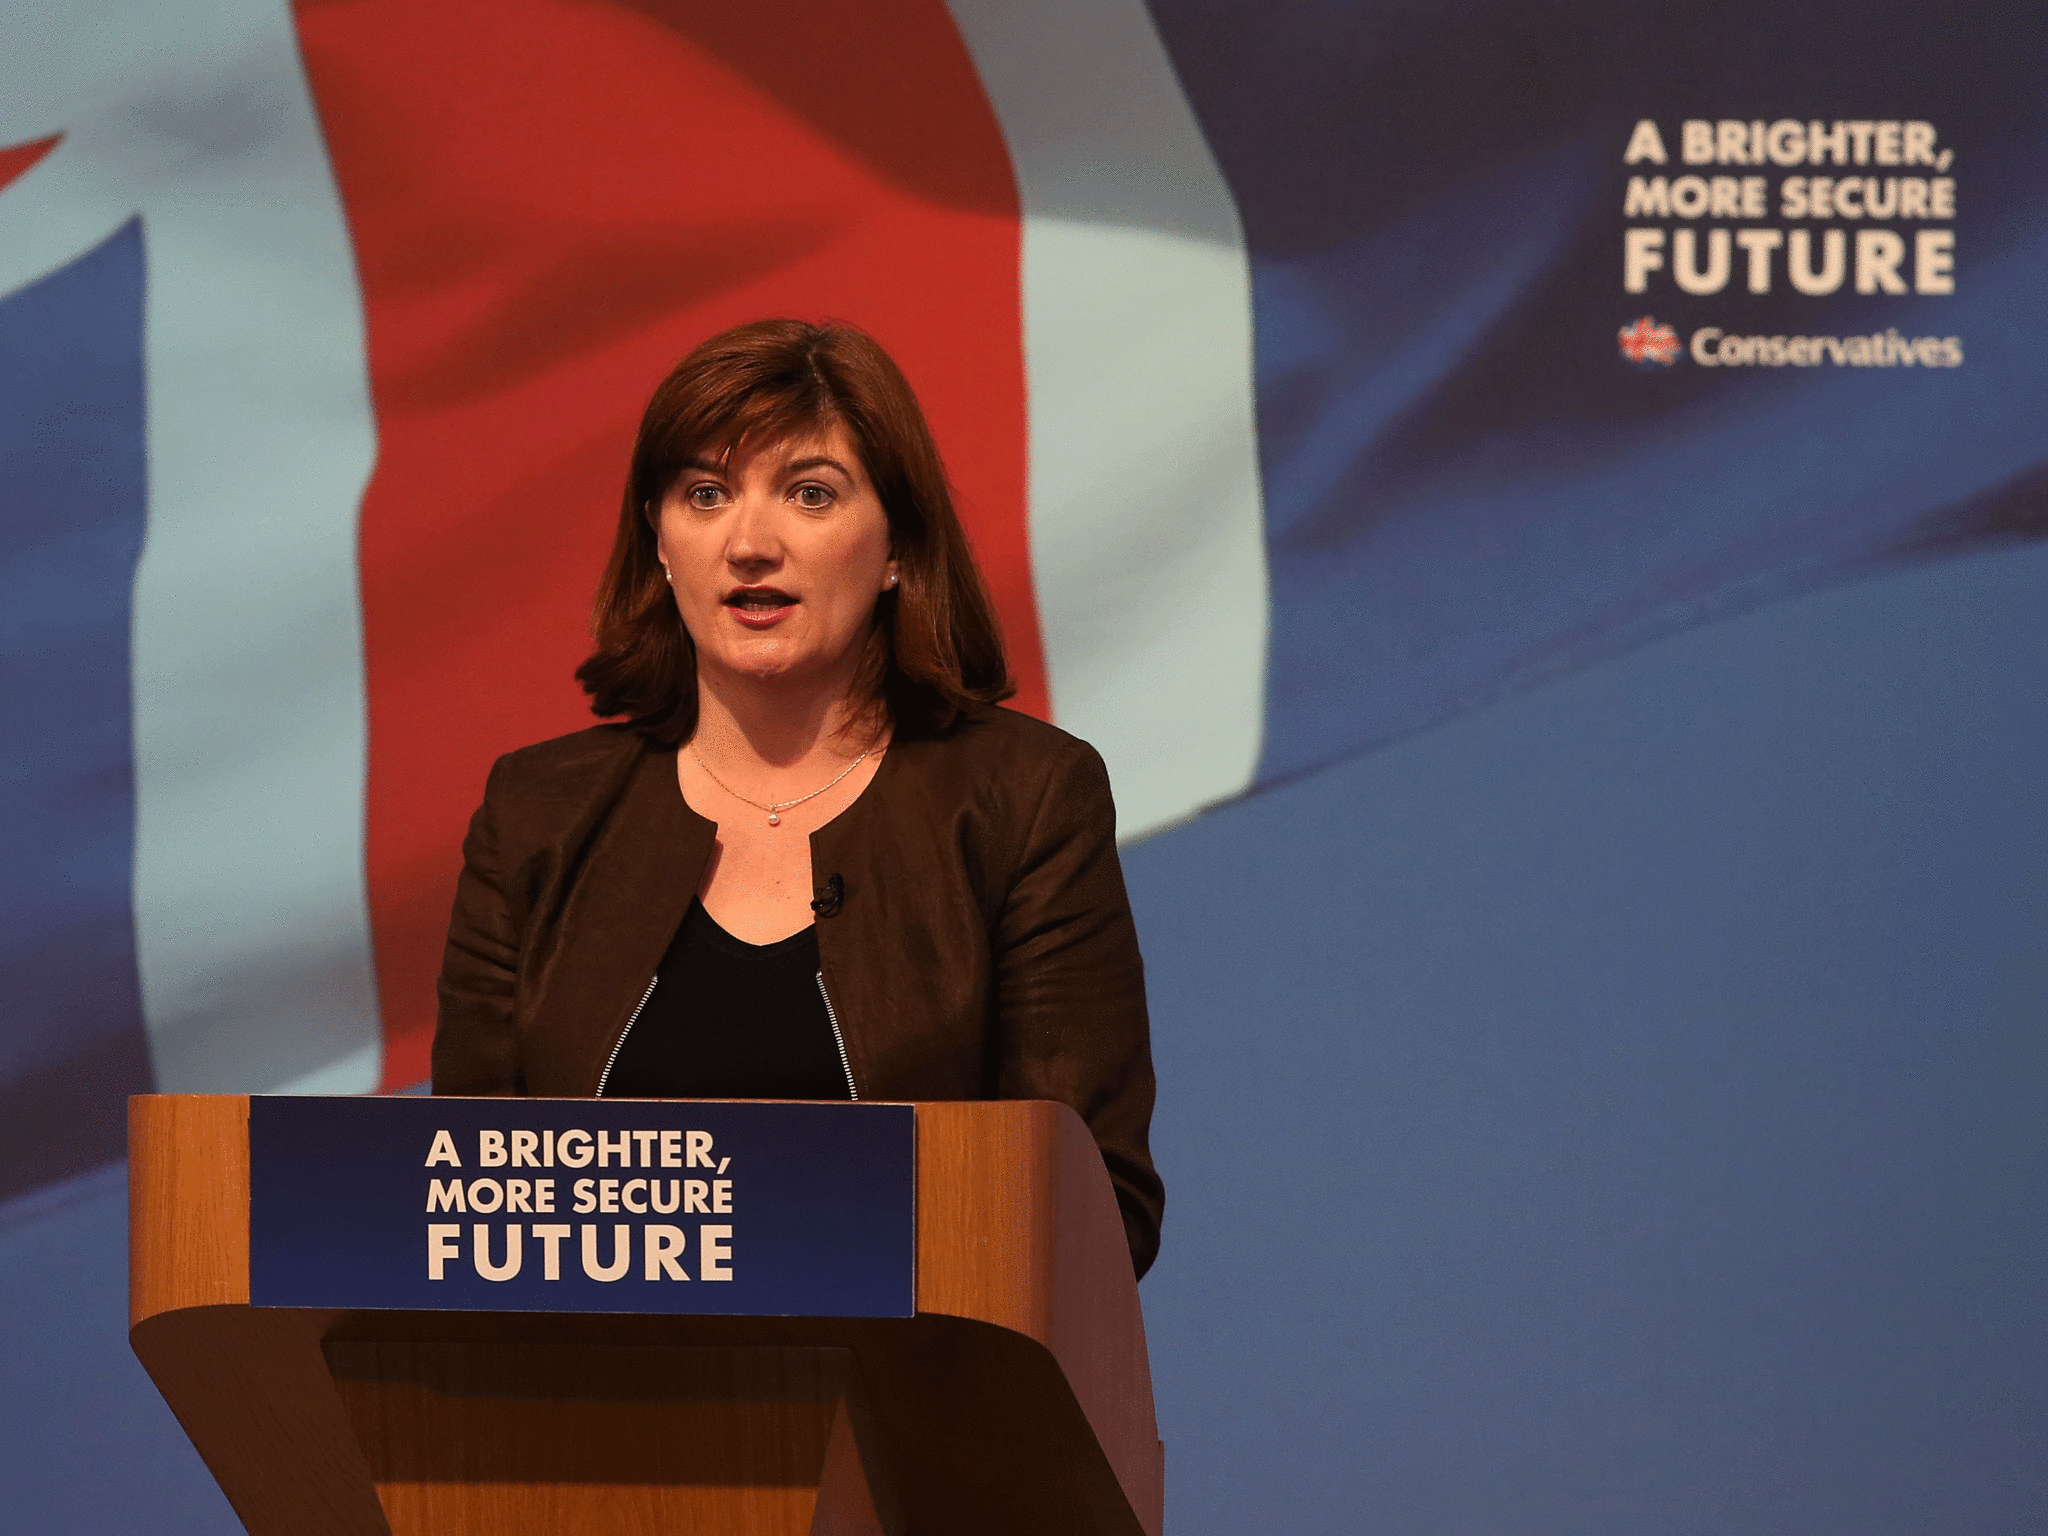 Teachers not happy Nicky Morgan reappointed